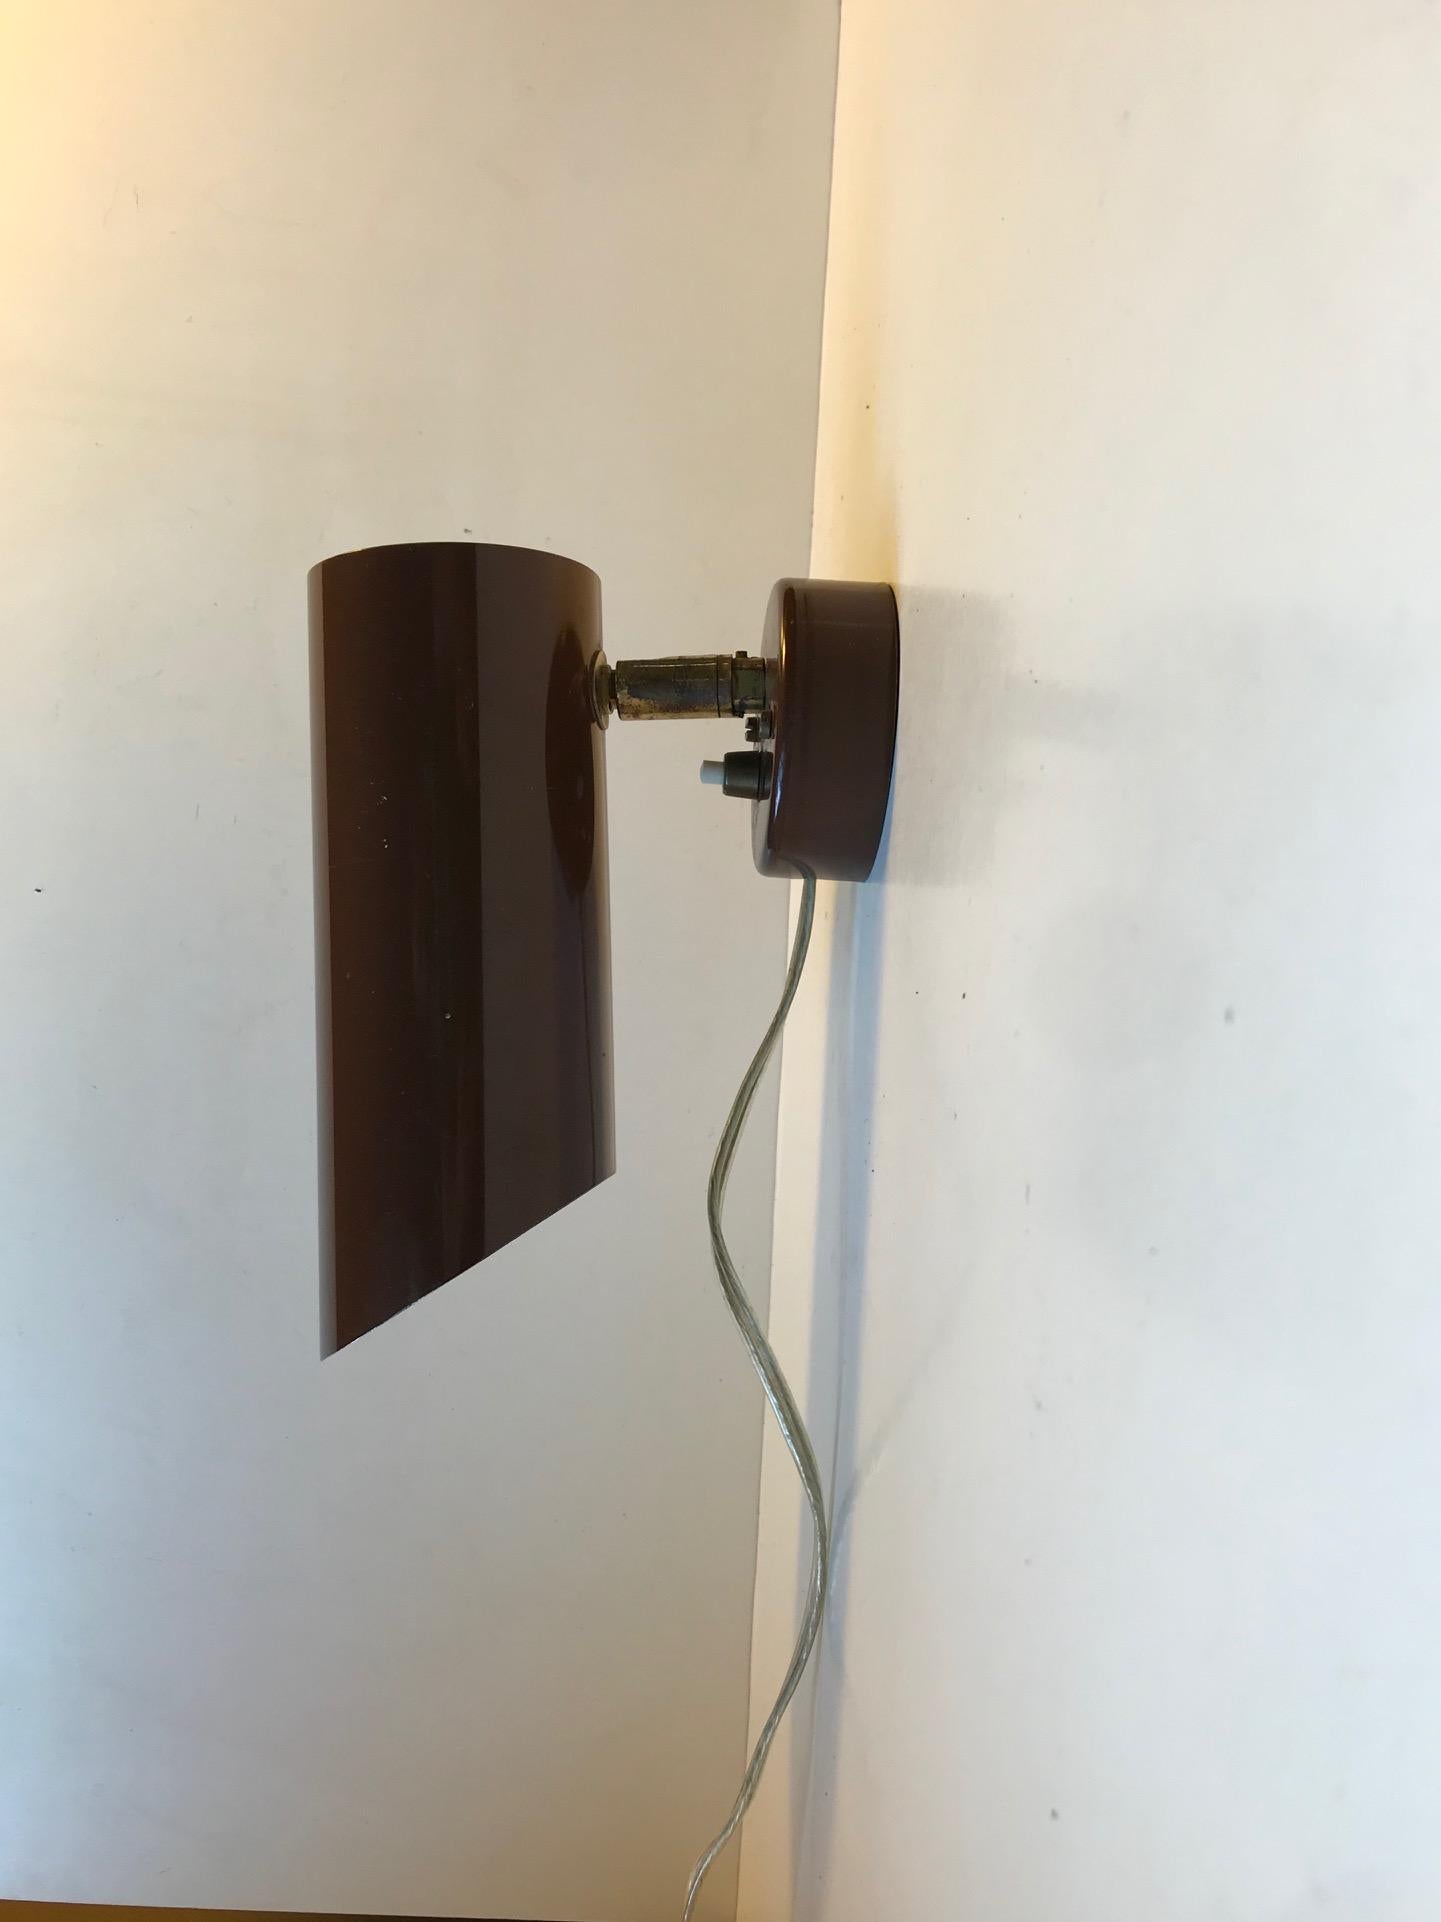 Cylindrical wall lamp composed of brown powder coated aluminium with joint and switch in patinated brass. Anonymous danish designer for Nordisk Solar during the 1960s. The style is reminiscent of similar designs by Gino Sarfatti and Serge Mouille.